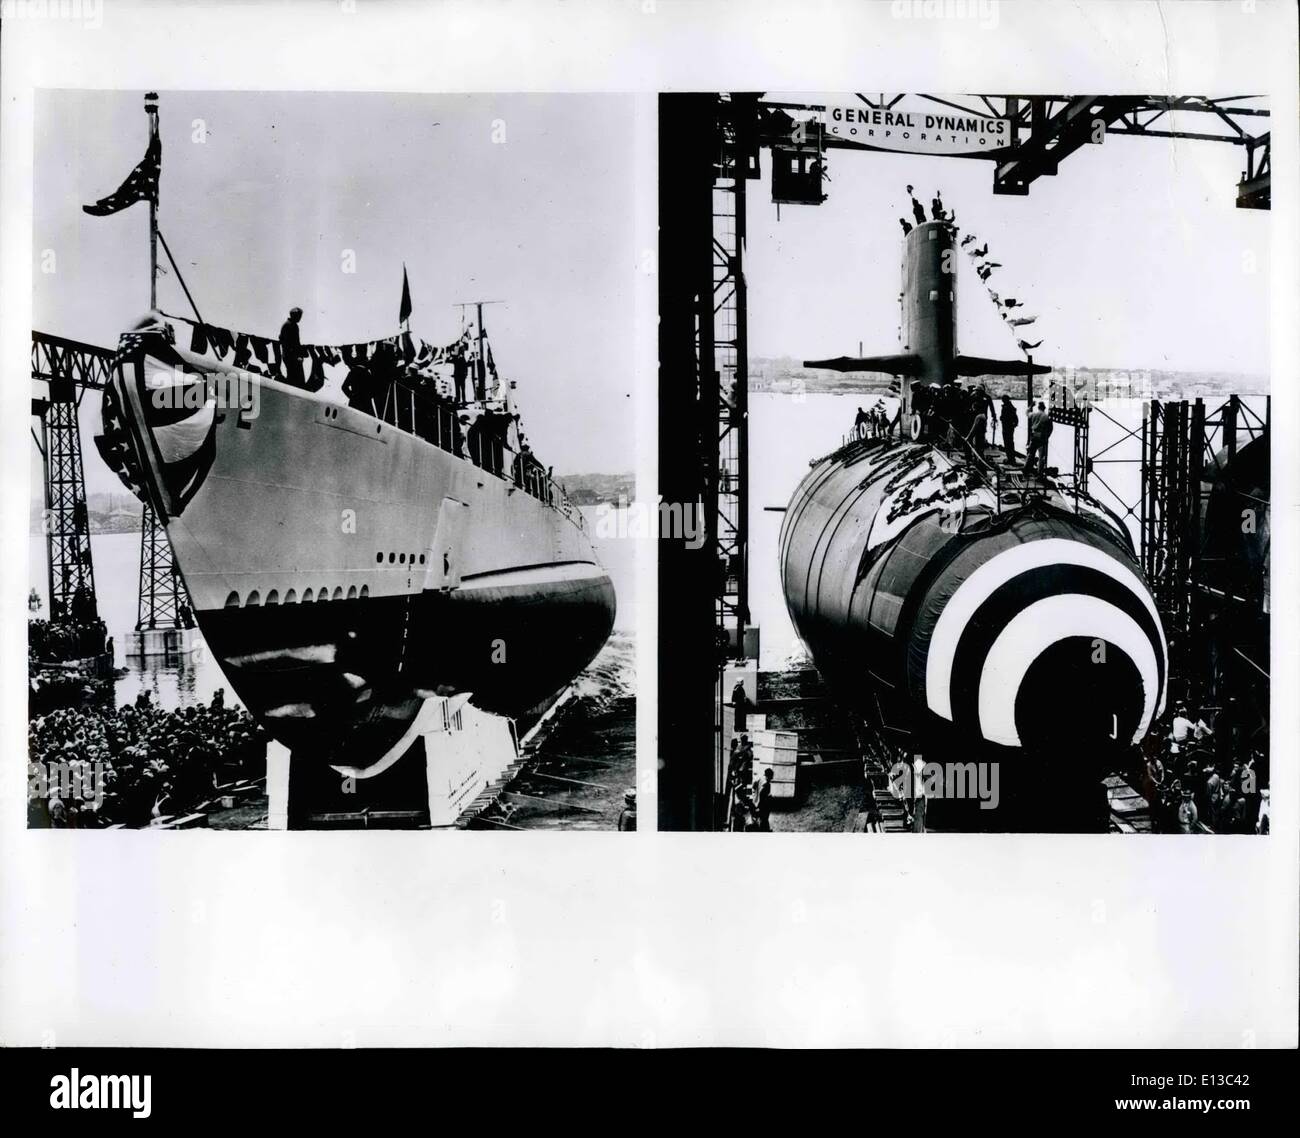 Feb. 29, 2012 - What A Difference 25 Years Makes: Submarine style changes are exemplified in these historical undersea ships which were launched a quarter century apart at the Groton, Conn. shipyard of General Dynamics Corporation's Electric Boat Division, the nation's leading sub builder. At left is the US Cuttlefish, first sub built in Groton, shown going down the ways on November 21, 1993. The clipper-ship type bow of the Cuttlefish was conventional right through World War II and was necessary because diesel power made them only part-time submersibles Stock Photo